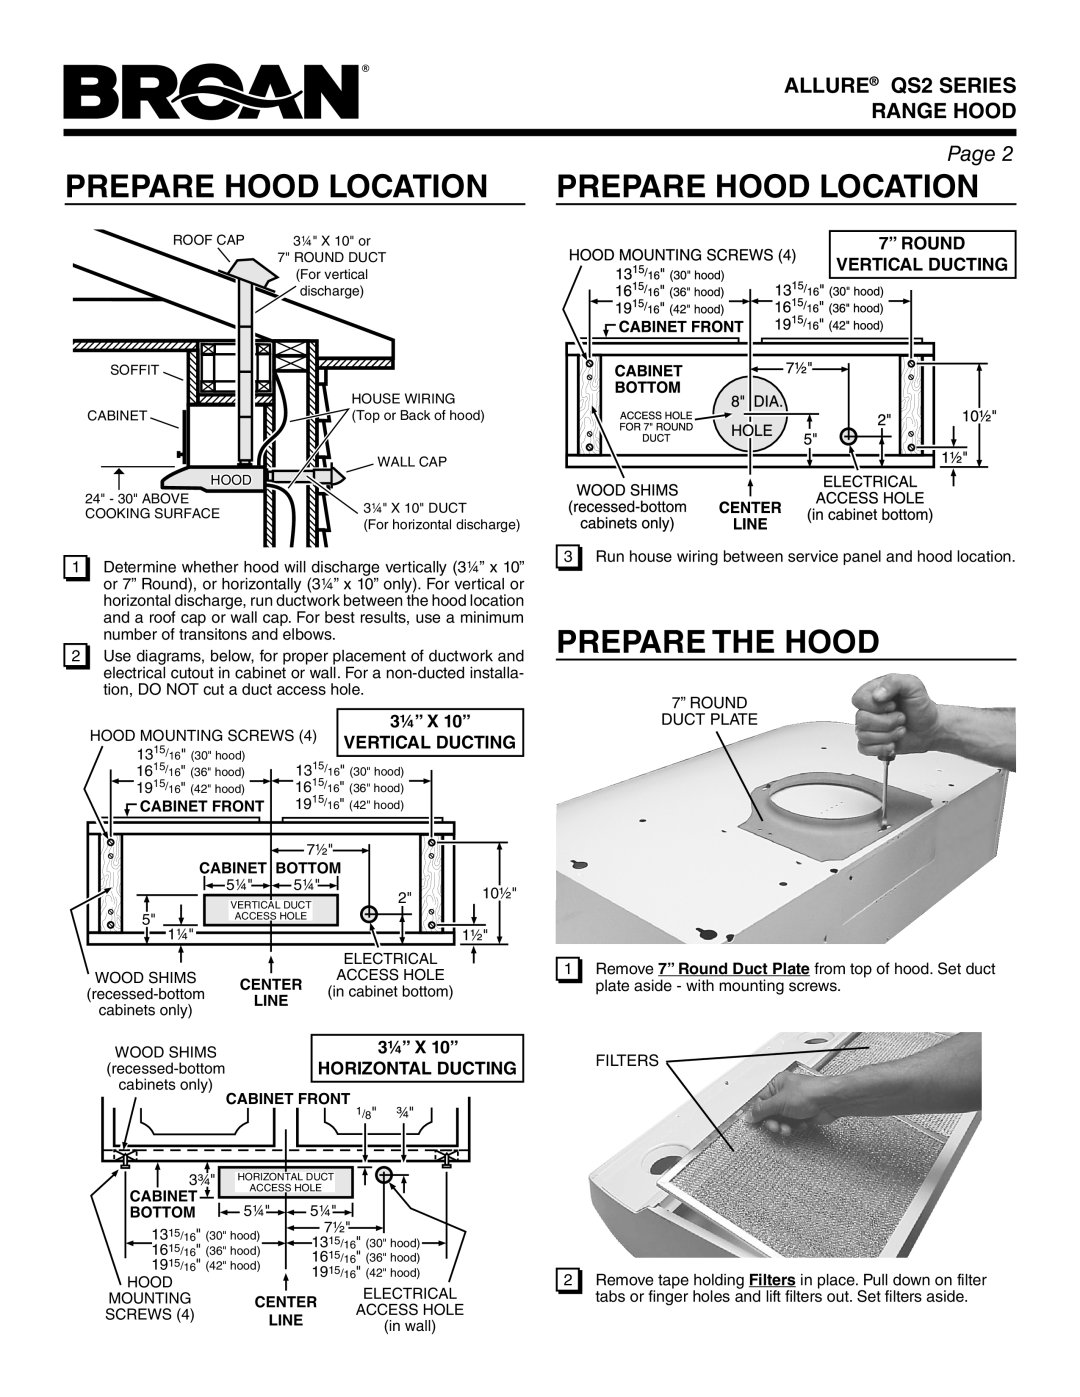 Broan QS236WW Prepare Hood Location, Prepare The Hood, Page, Vertical Ducting, Horizontal Ducting, Cabinet Front, Center 